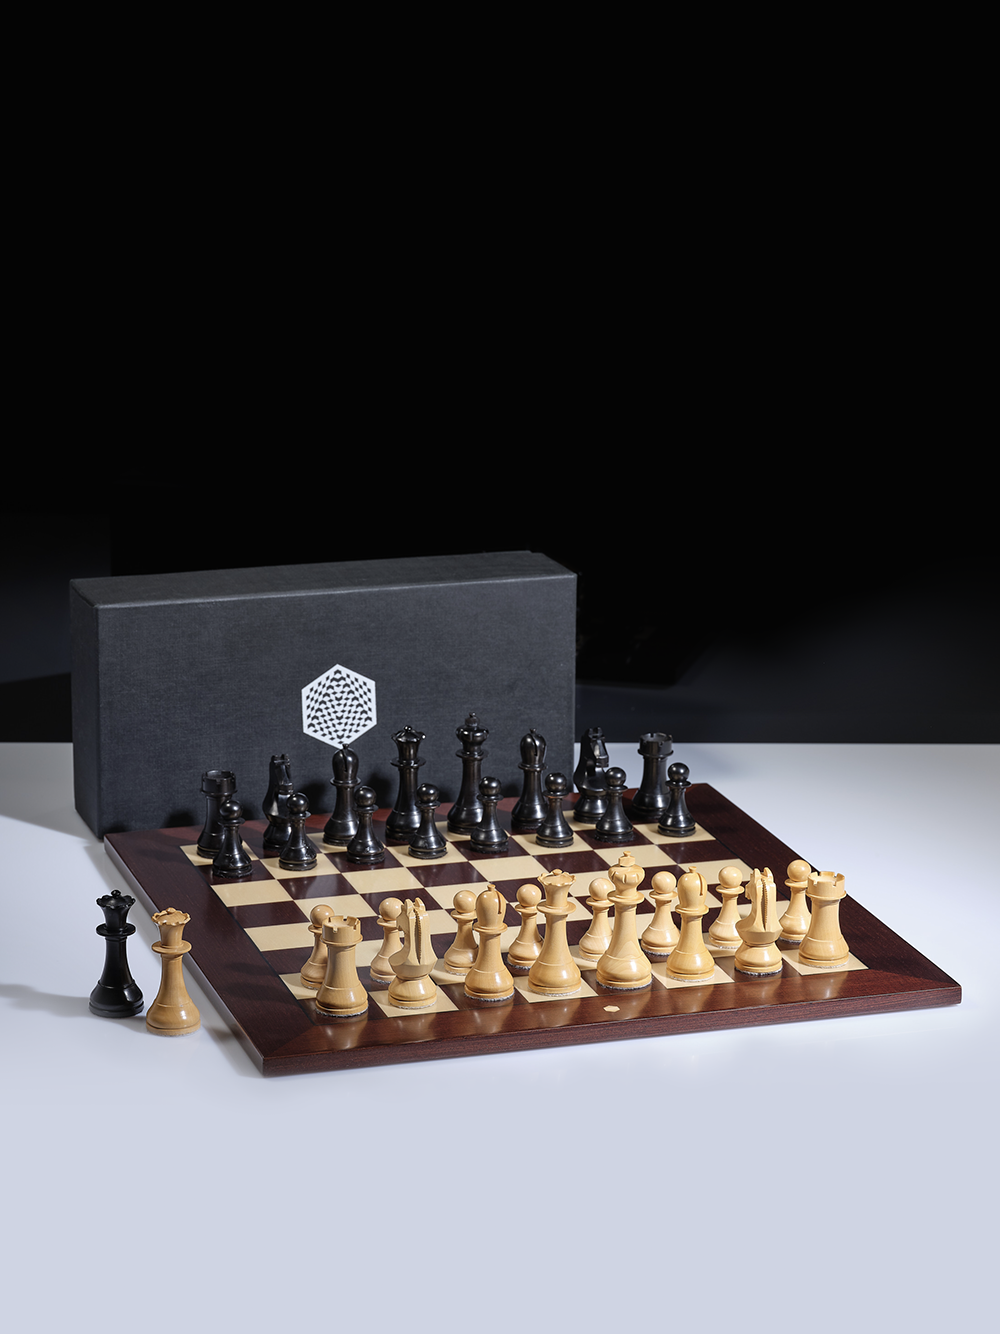 Unboxing the STUNNING $550 Official World Chess Championship Set